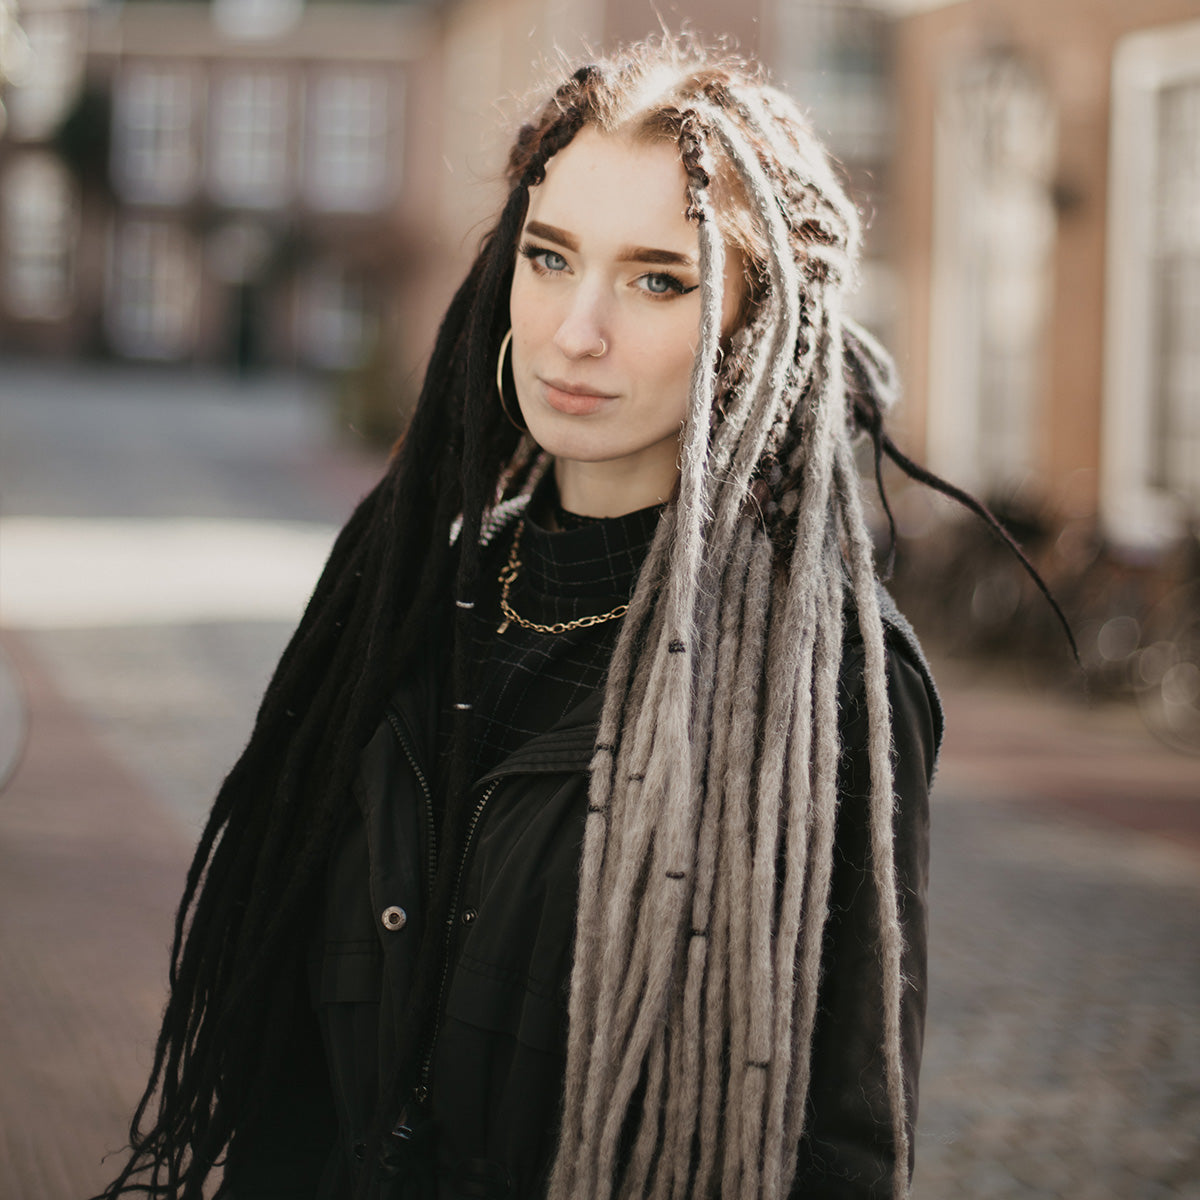 Are you also going for a Split Hairstyle with your Synthetic Dreads?